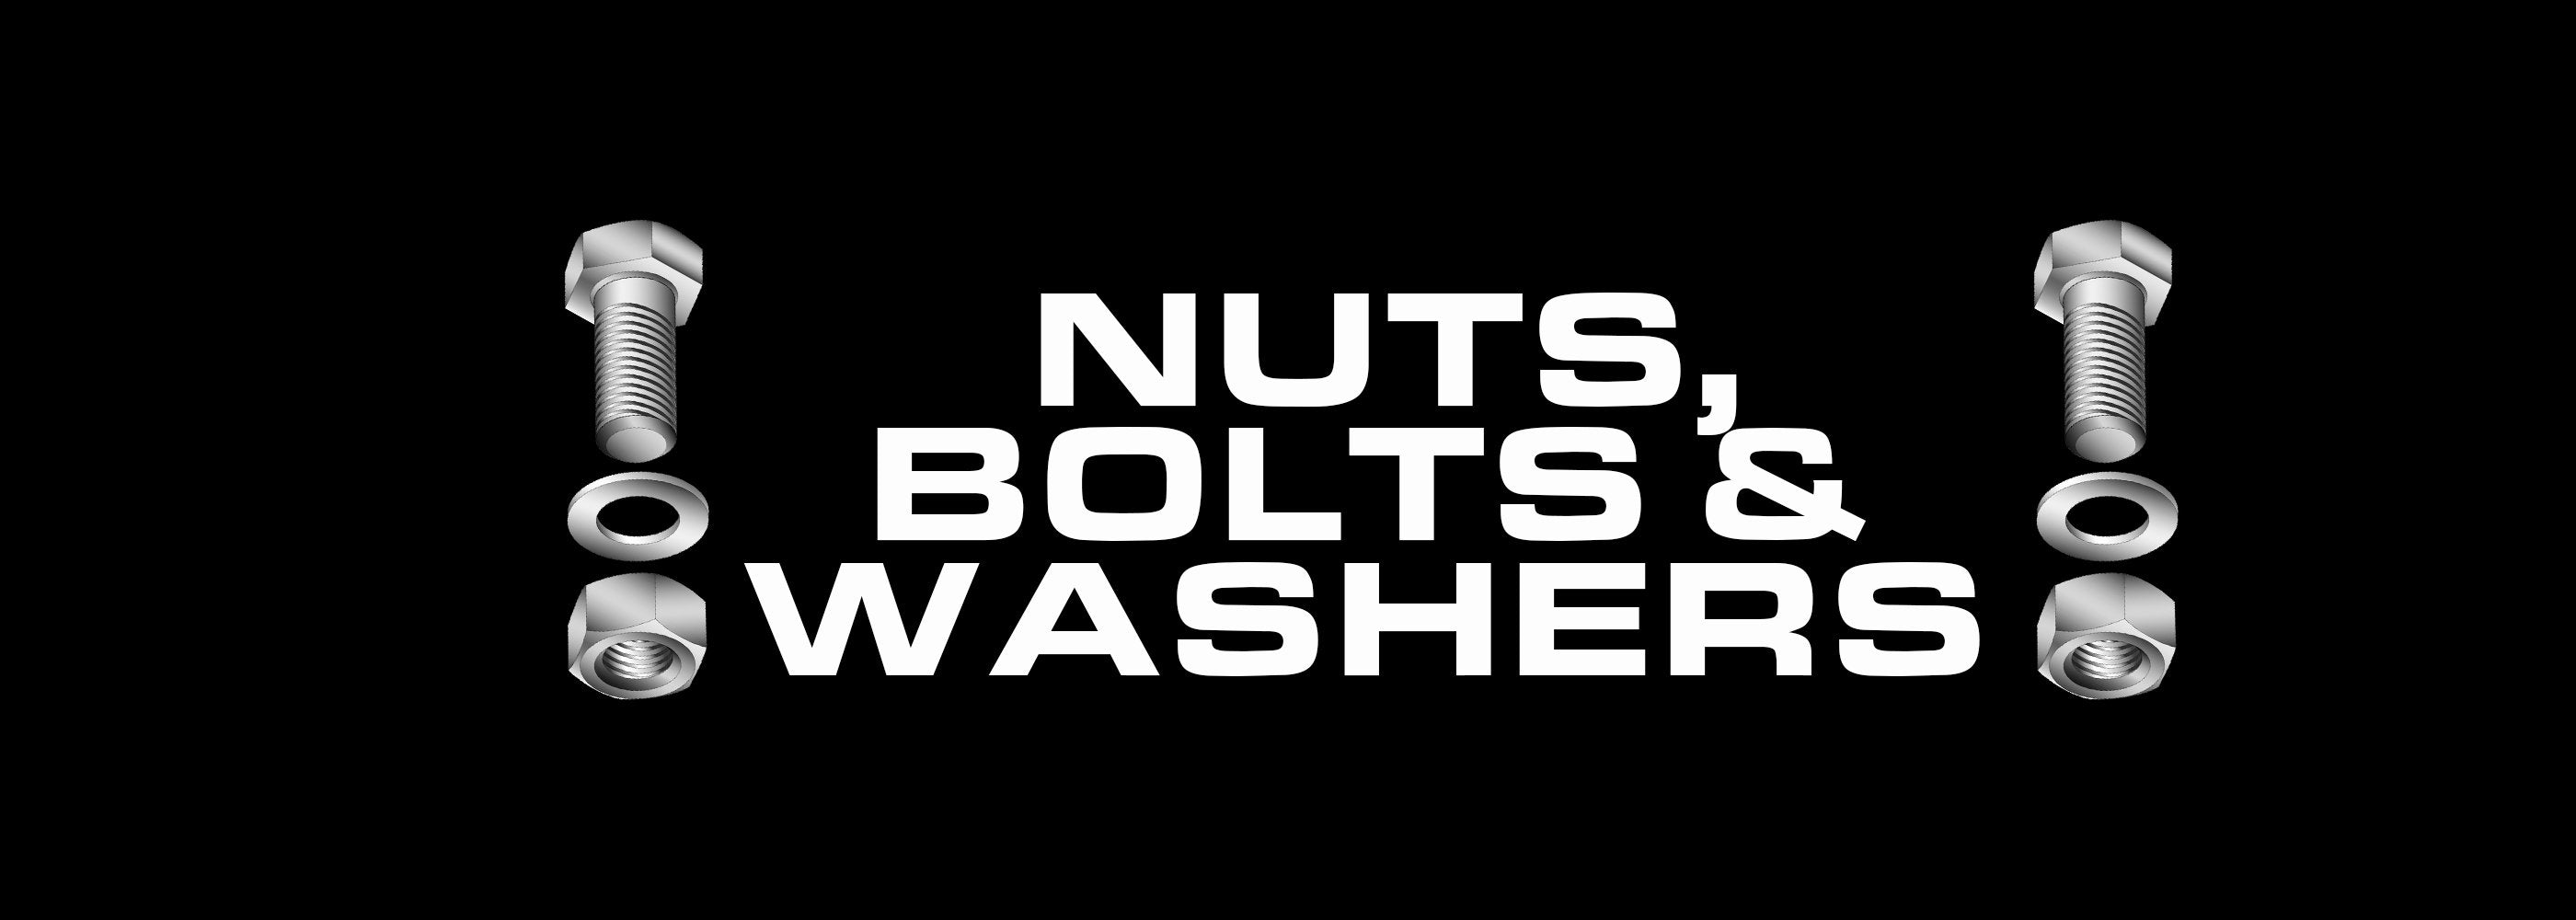 CATEGORY BANNER FOR NUTS BOLTS AND WASHERS FOR SALE AT UNITED FIXINGS